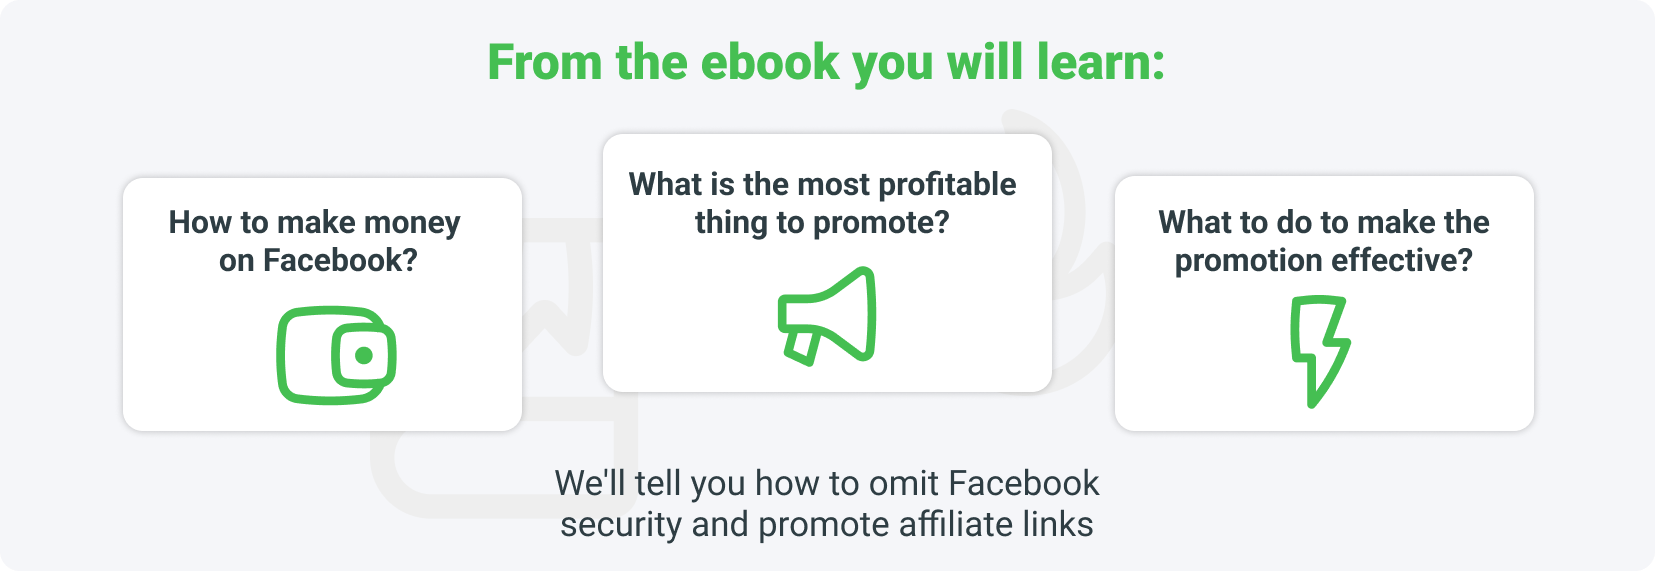 Contents of the ebook about making money on Facebook